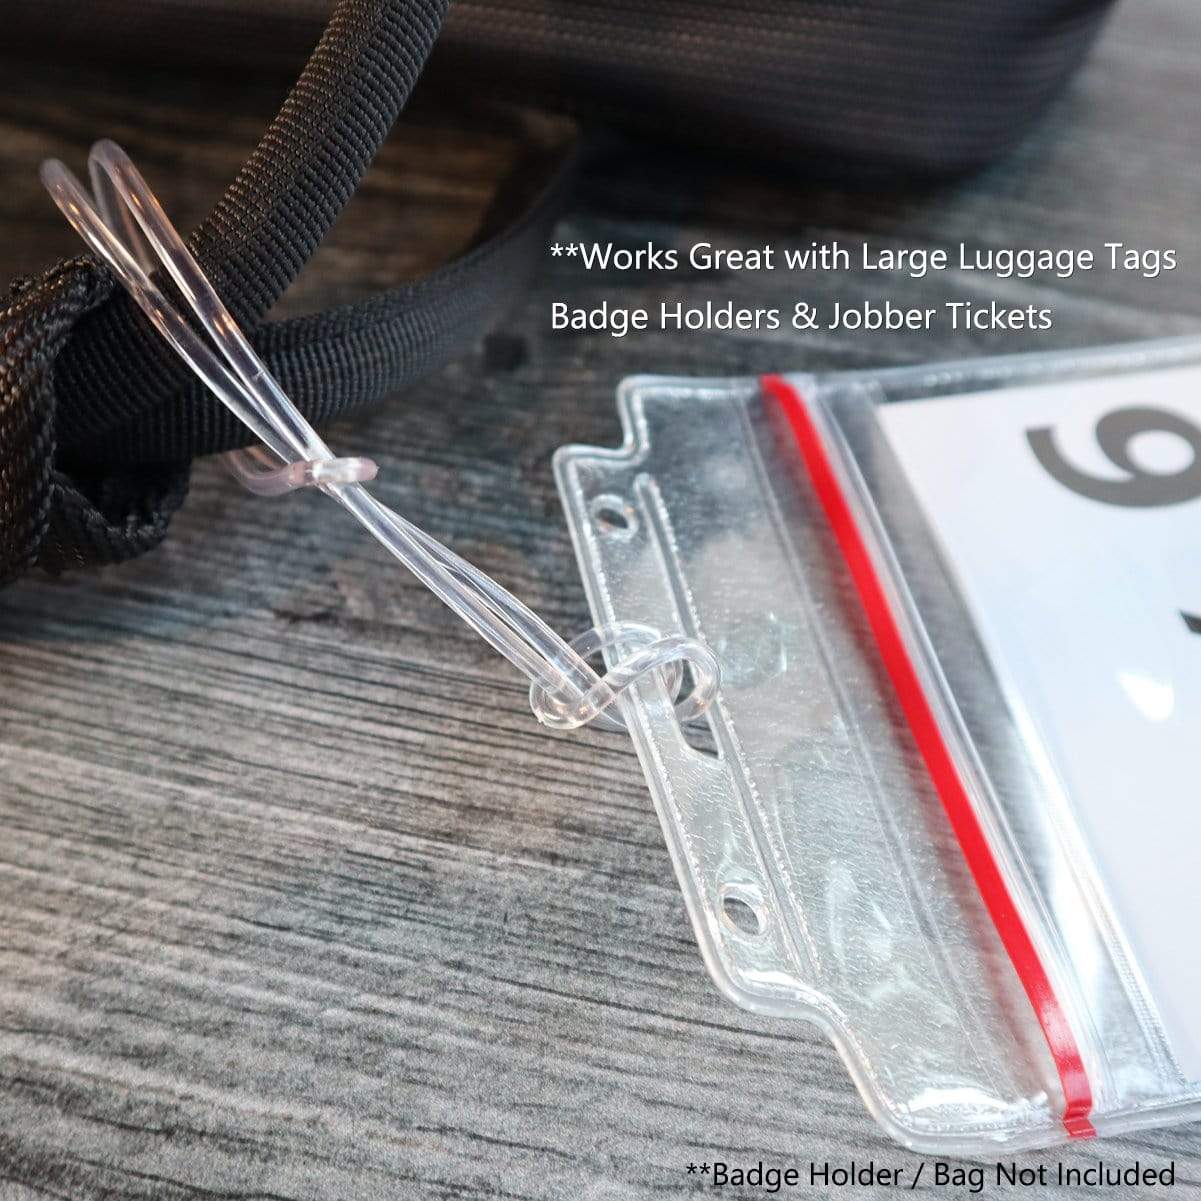 Close-up of a clear plastic luggage tag holder looped through a badge holder on a black strap. Text on the image: "Works Great with Extra Long 9" Luggage Tag Loops - Clear Worm Loops for Luggage Tags (2410-2100) Badge Holder/Bag Not Included".